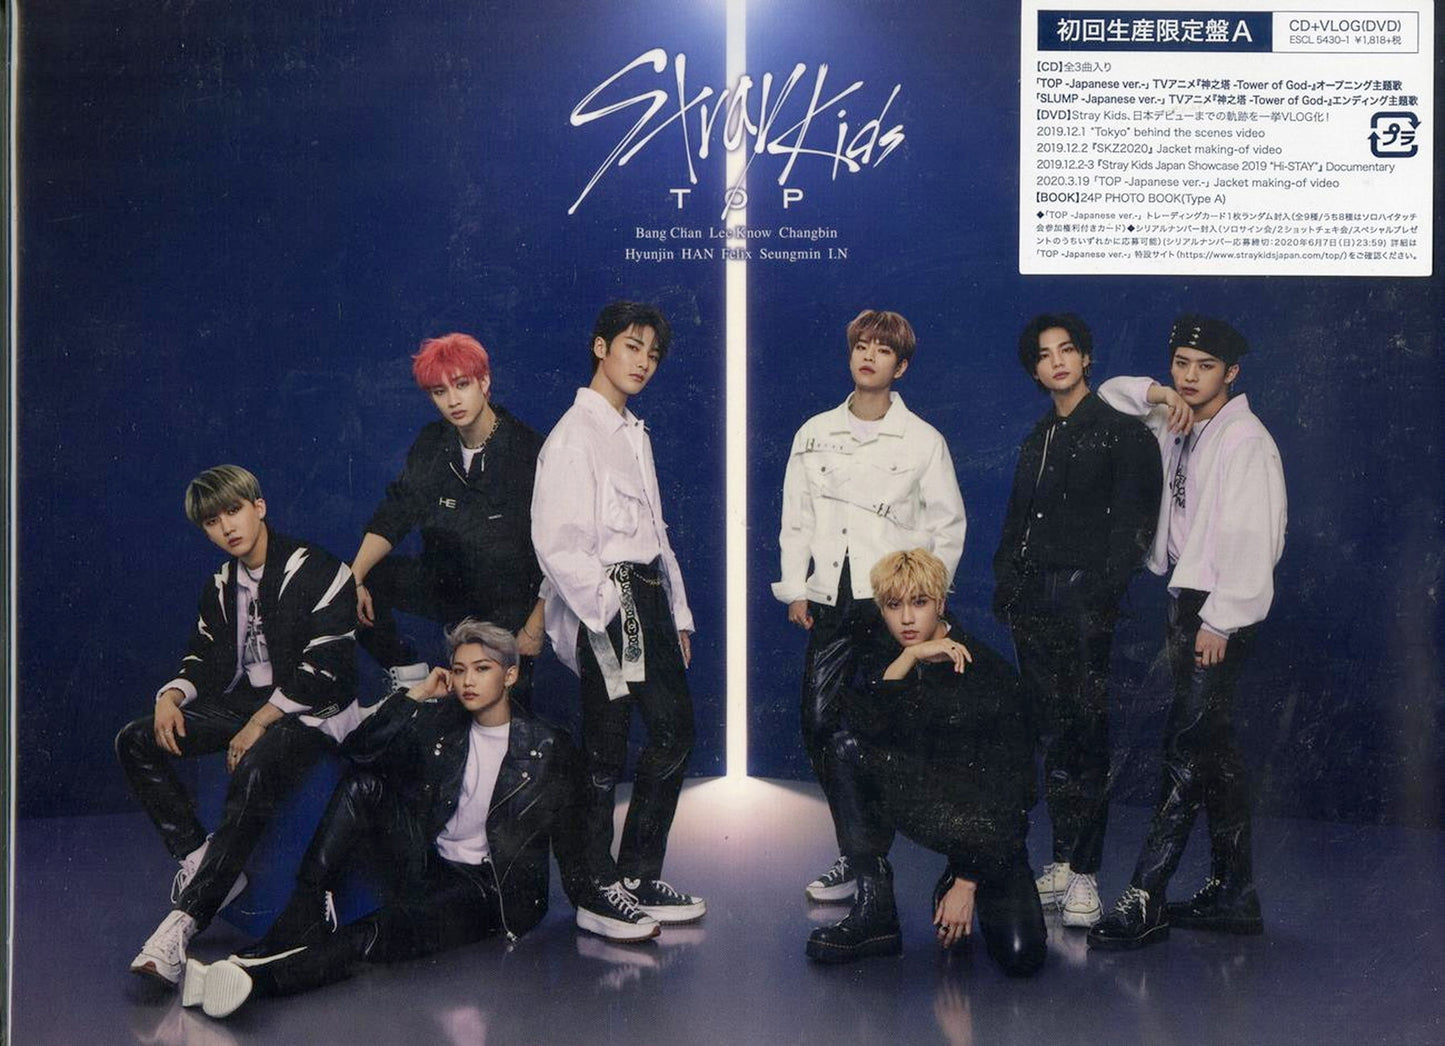 Stray Kids - Top -Japanese Ver.- (Type-A) - Digipak CD+DVD+Book Limited Edition